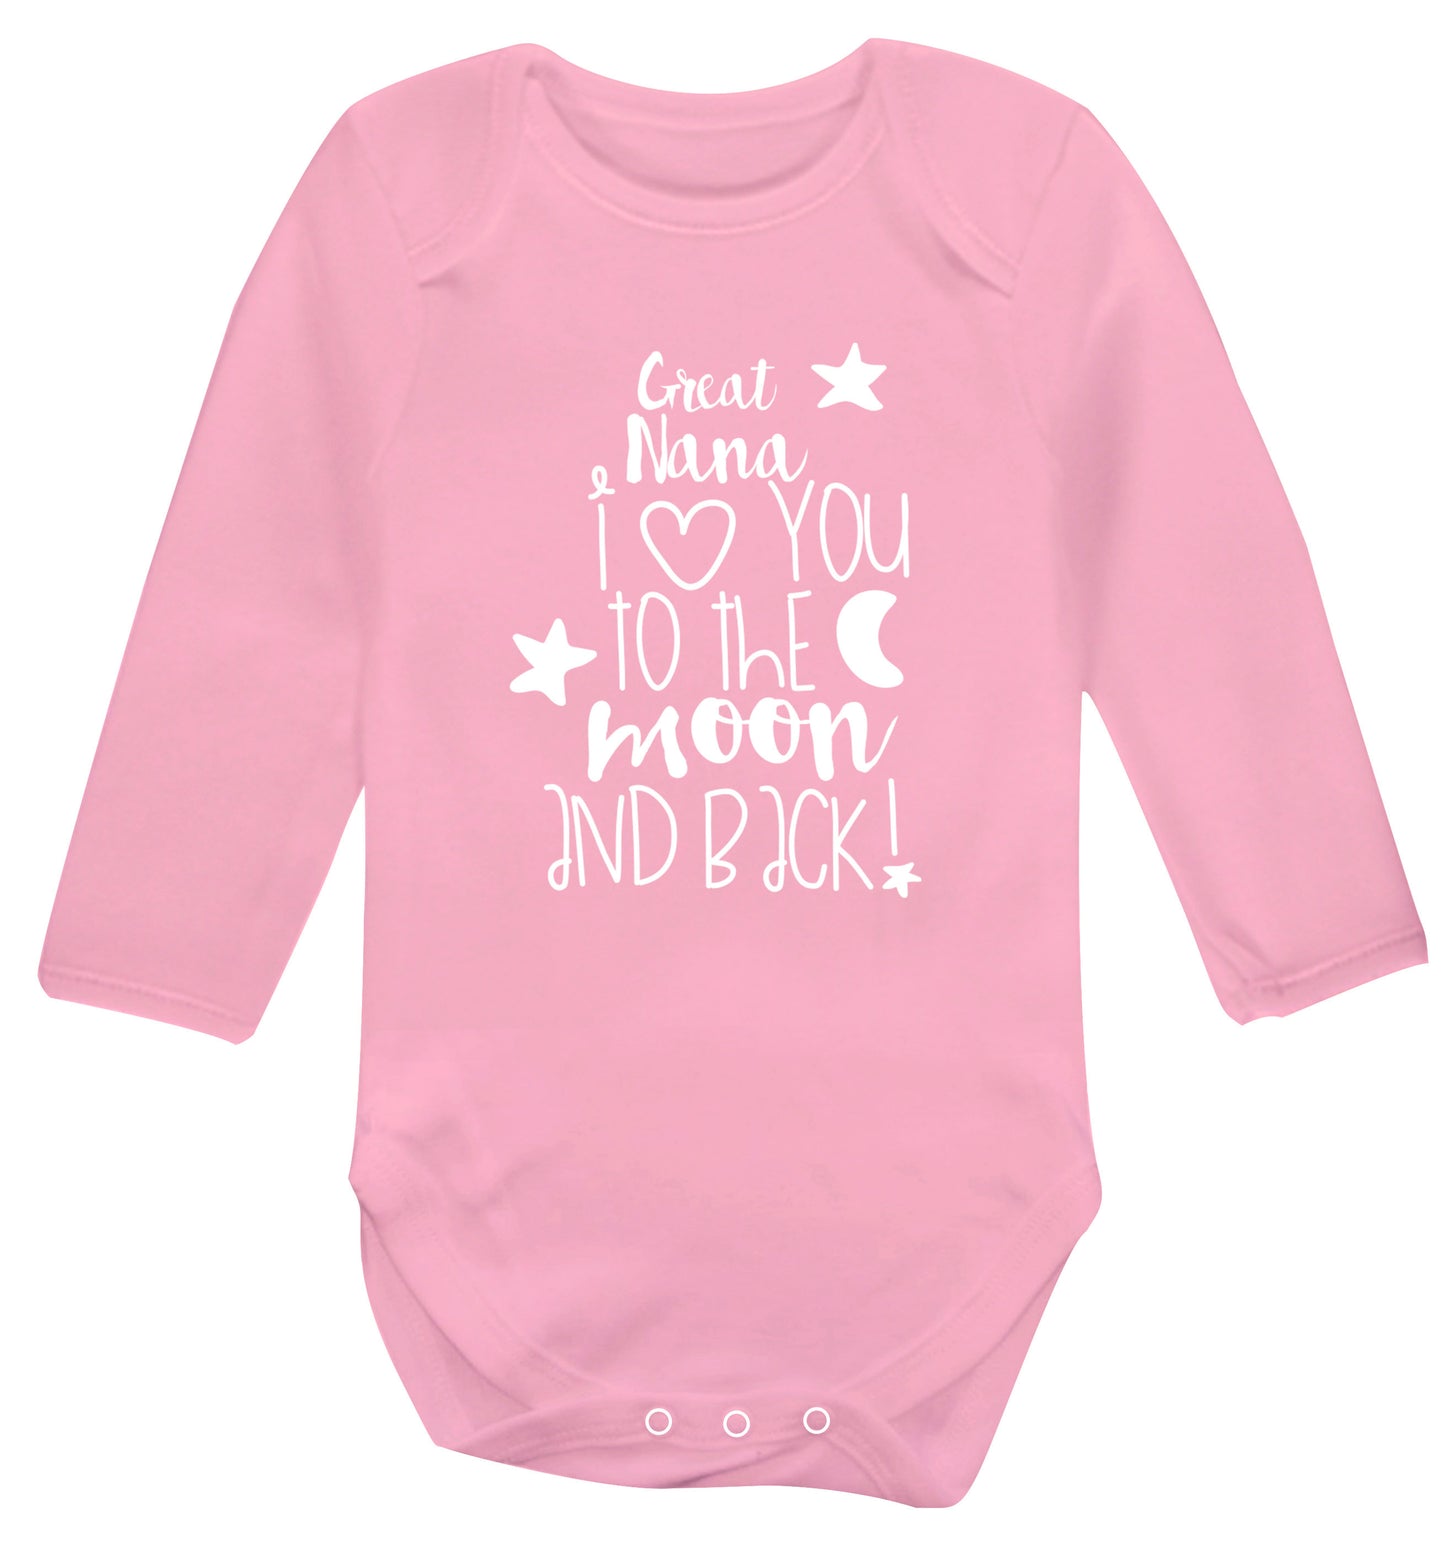 Great Nana I love you to the moon and back Baby Vest long sleeved pale pink 6-12 months